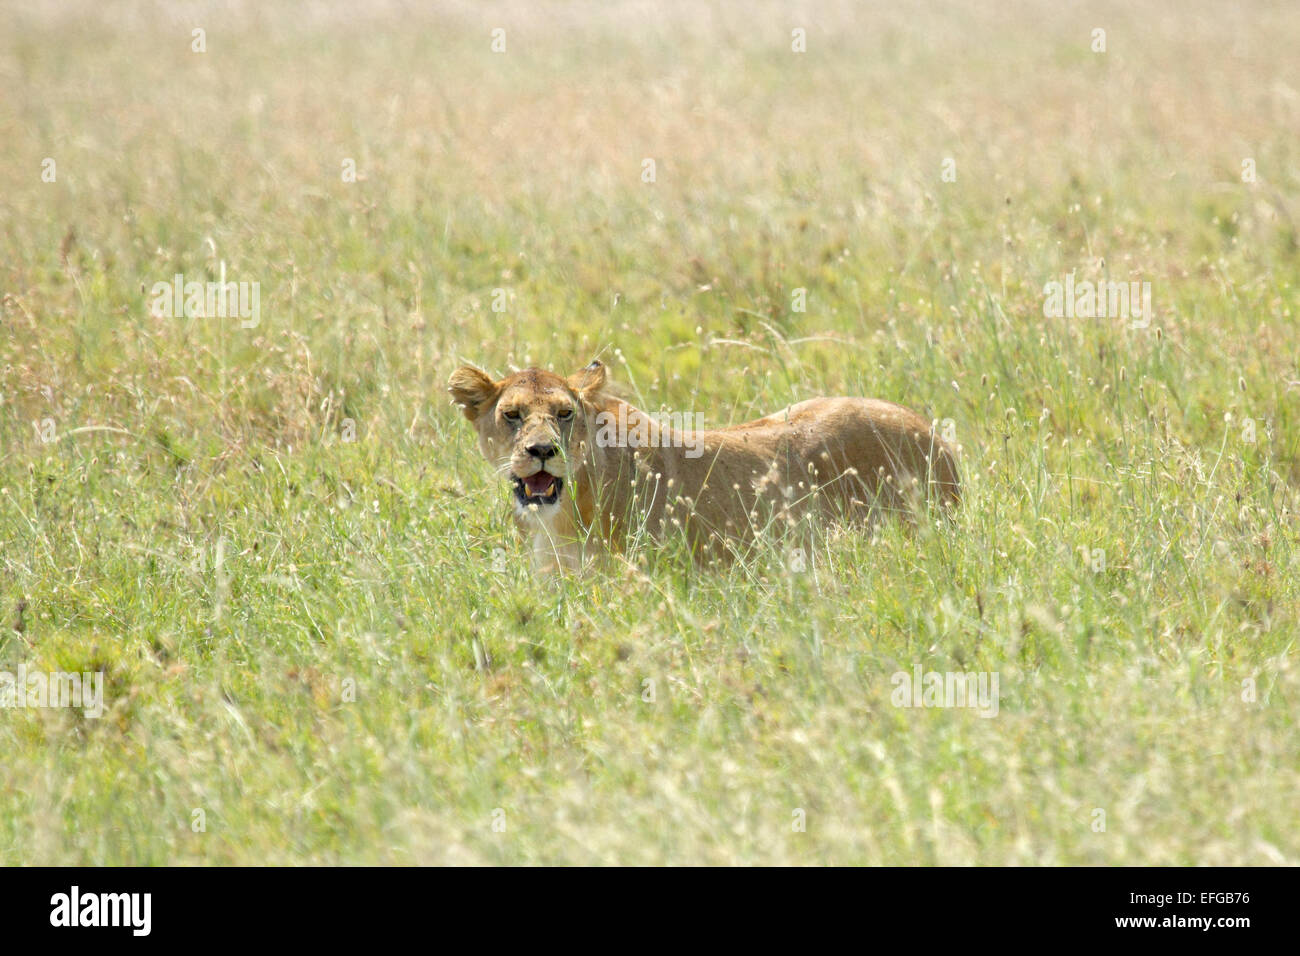 A lioness, Panthera Leo, looking hidden in the grass in Serengeti National Park, Tanzania Stock Photo